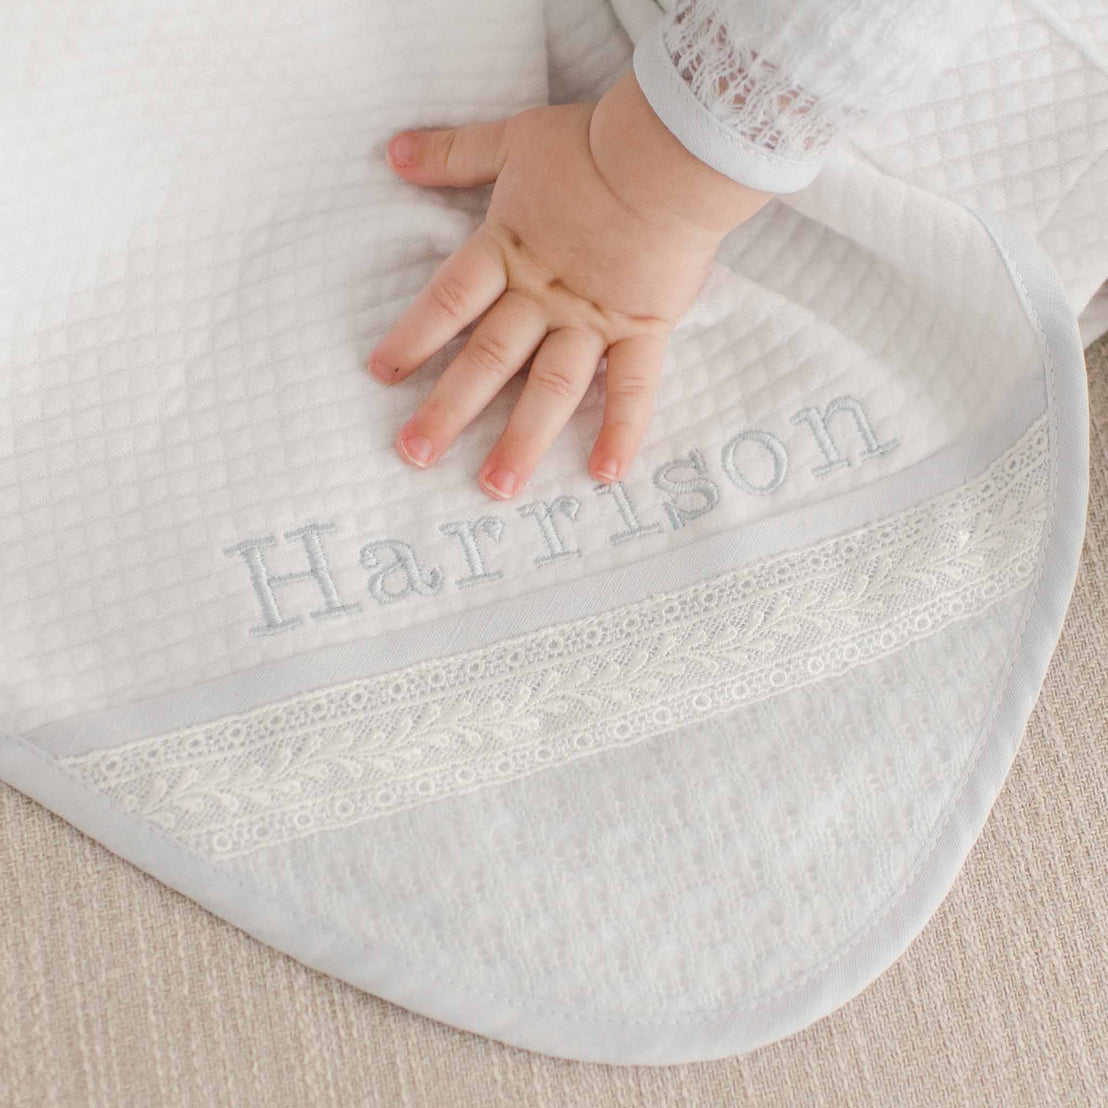 A baby's hand touches the Harrison Personalized Blanket made from plush quilted white cotton and trimmed with light blue linen. The corner of the blanket features ivory Venice lace and is embroidered in light blue thread with the name "Harrison"